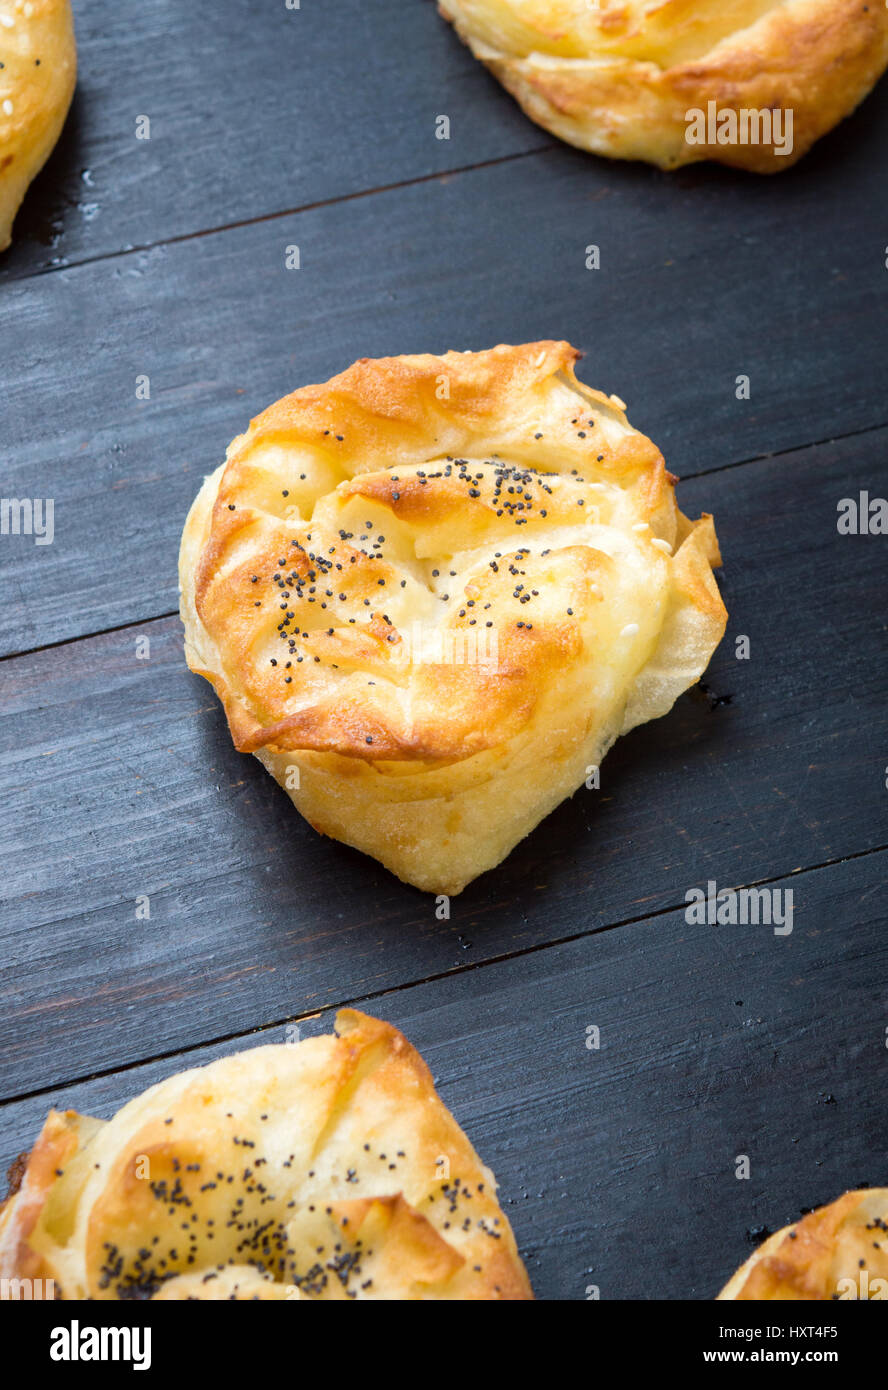 Homemade cheese pie rolls covered with sesame on a table Stock Photo